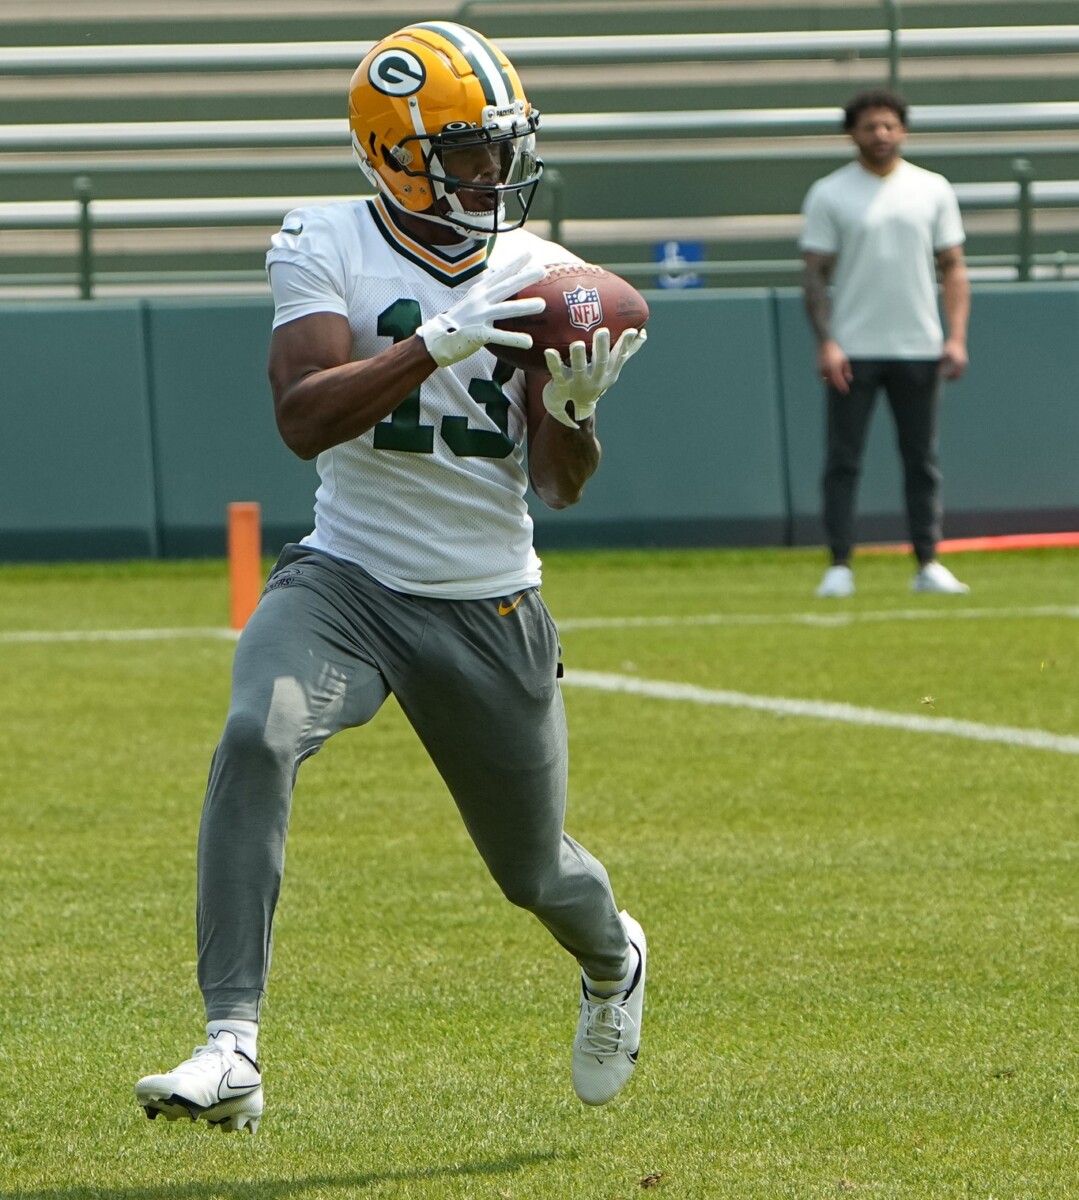 Green Bay Packers wide receiver Dontayvion Wicks